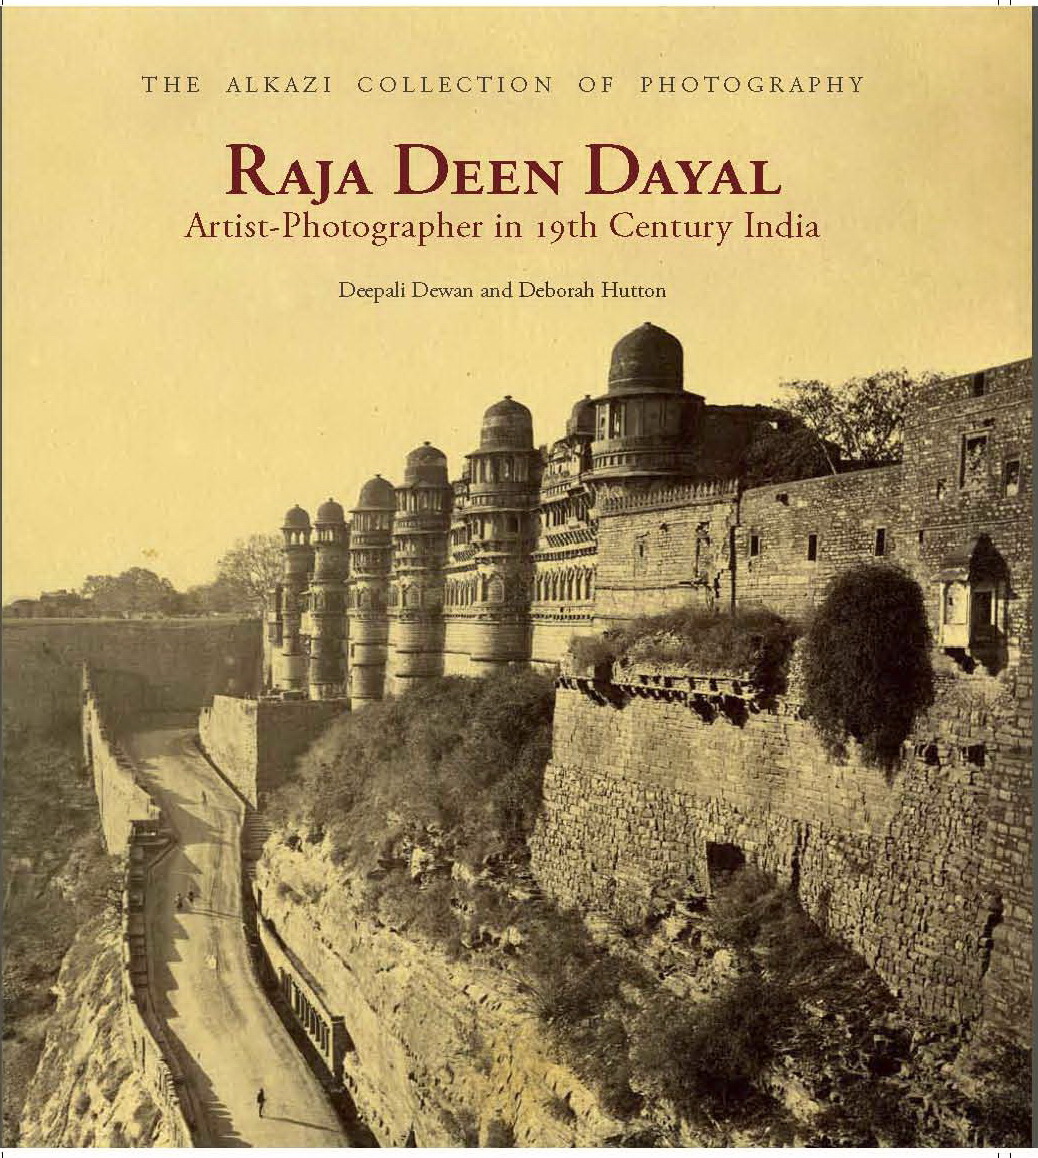 Cover of Raja Deen Dayal: Artist-Photographer in 19th-Century India, by Deepali Dewan and Deborah Hutton, Ahmedabad and New Delhi: Mapin and the Alkazi Collection of Photography, 2013. 